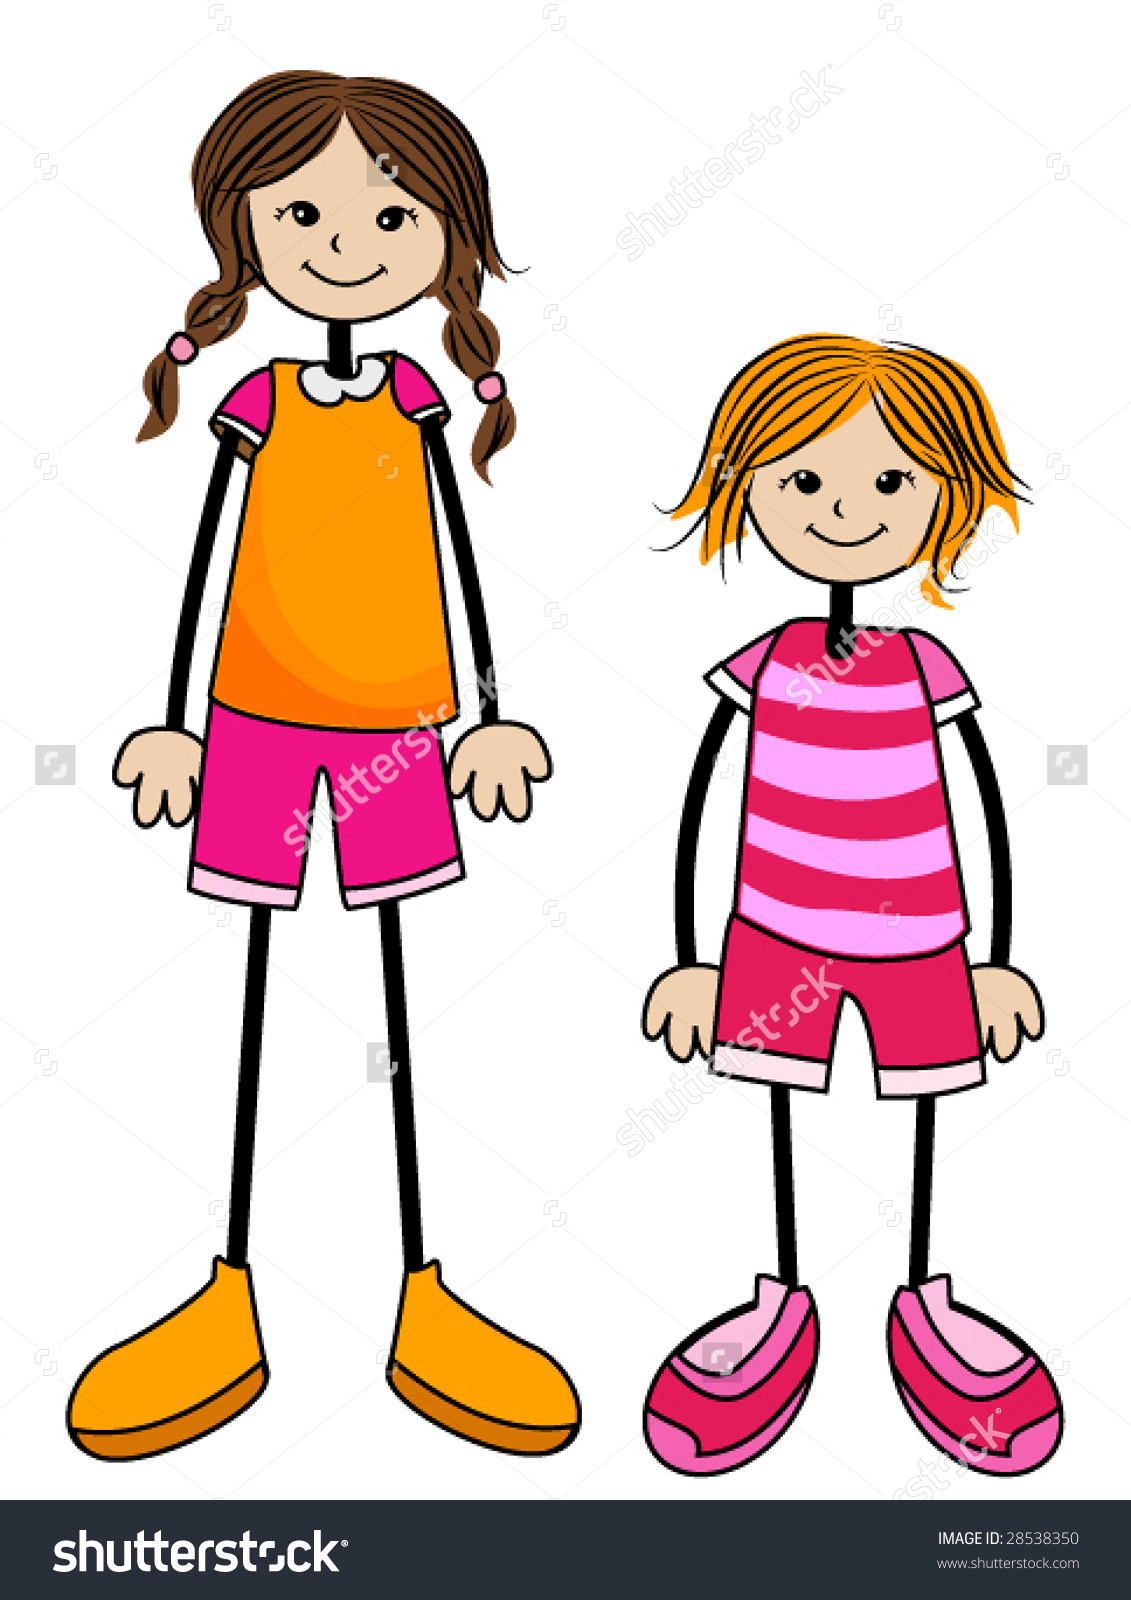 Short Girl Next To Tall Person Clipart.